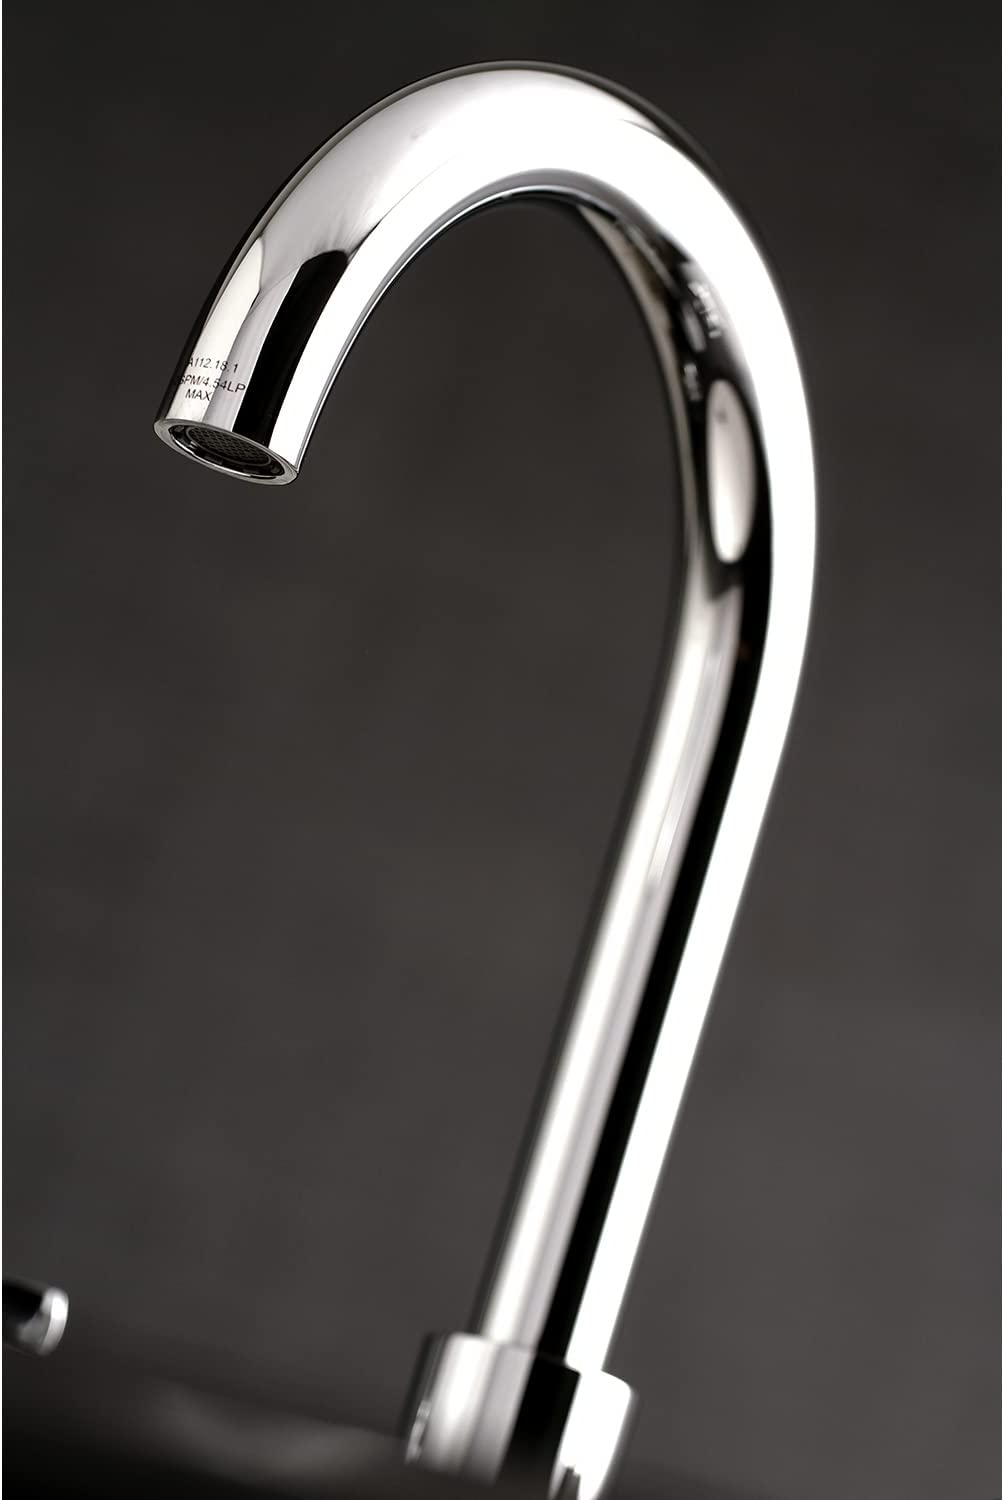 Kingston Brass FSC8921DX Concord Widespread Bathroom Faucet, Polished Chrome